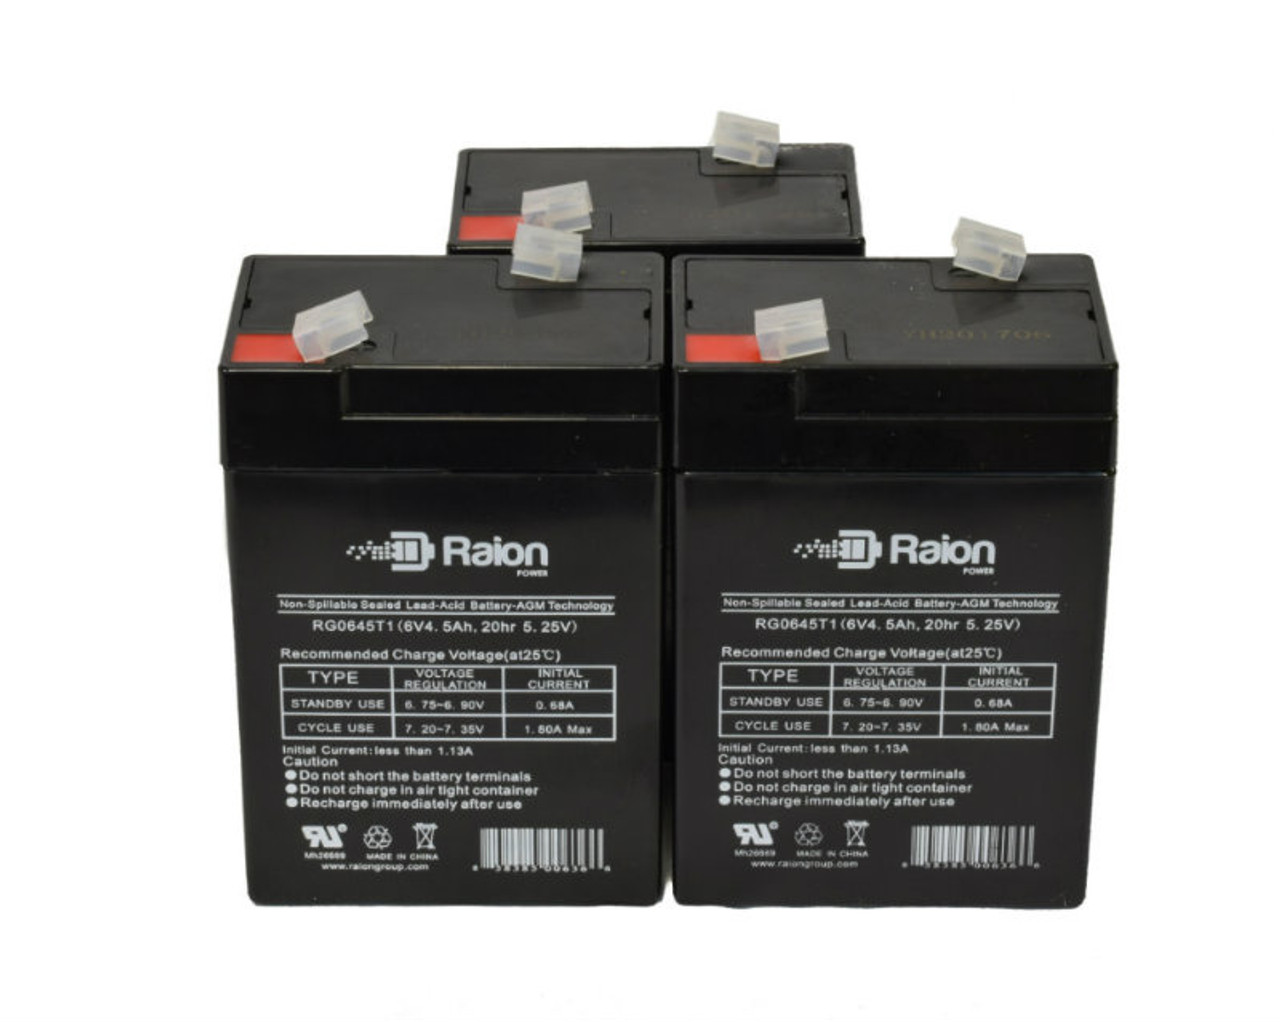 Raion Power RG0645T1 6V 4.5Ah Replacement Medical Equipment Battery for Mcgaw 522 Intelligent Pump - 3 Pack